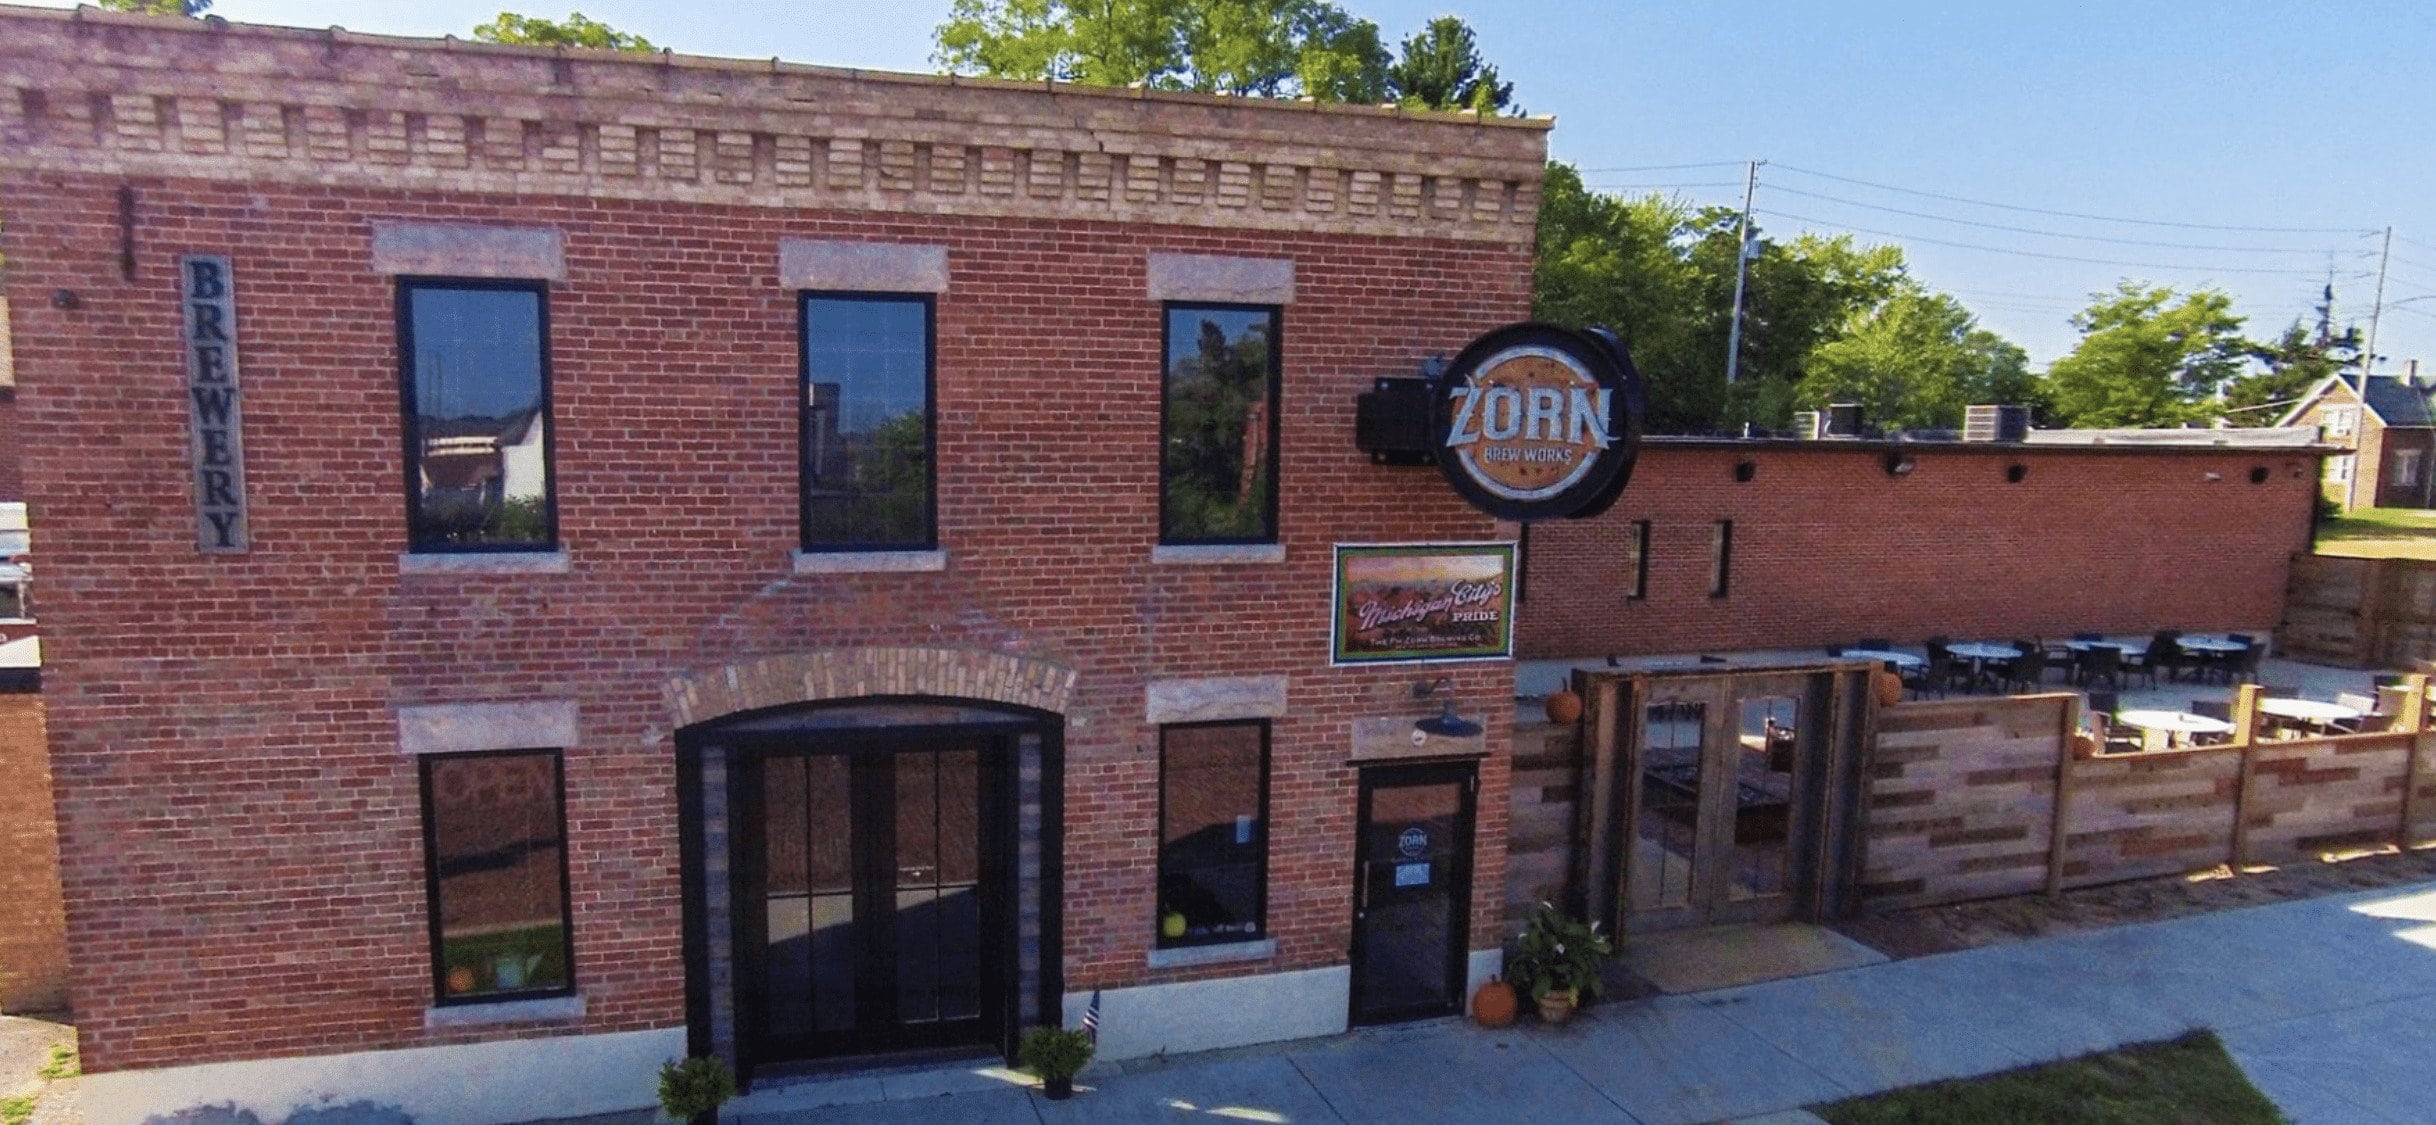 Exterior drone shot of Zorn Brewing